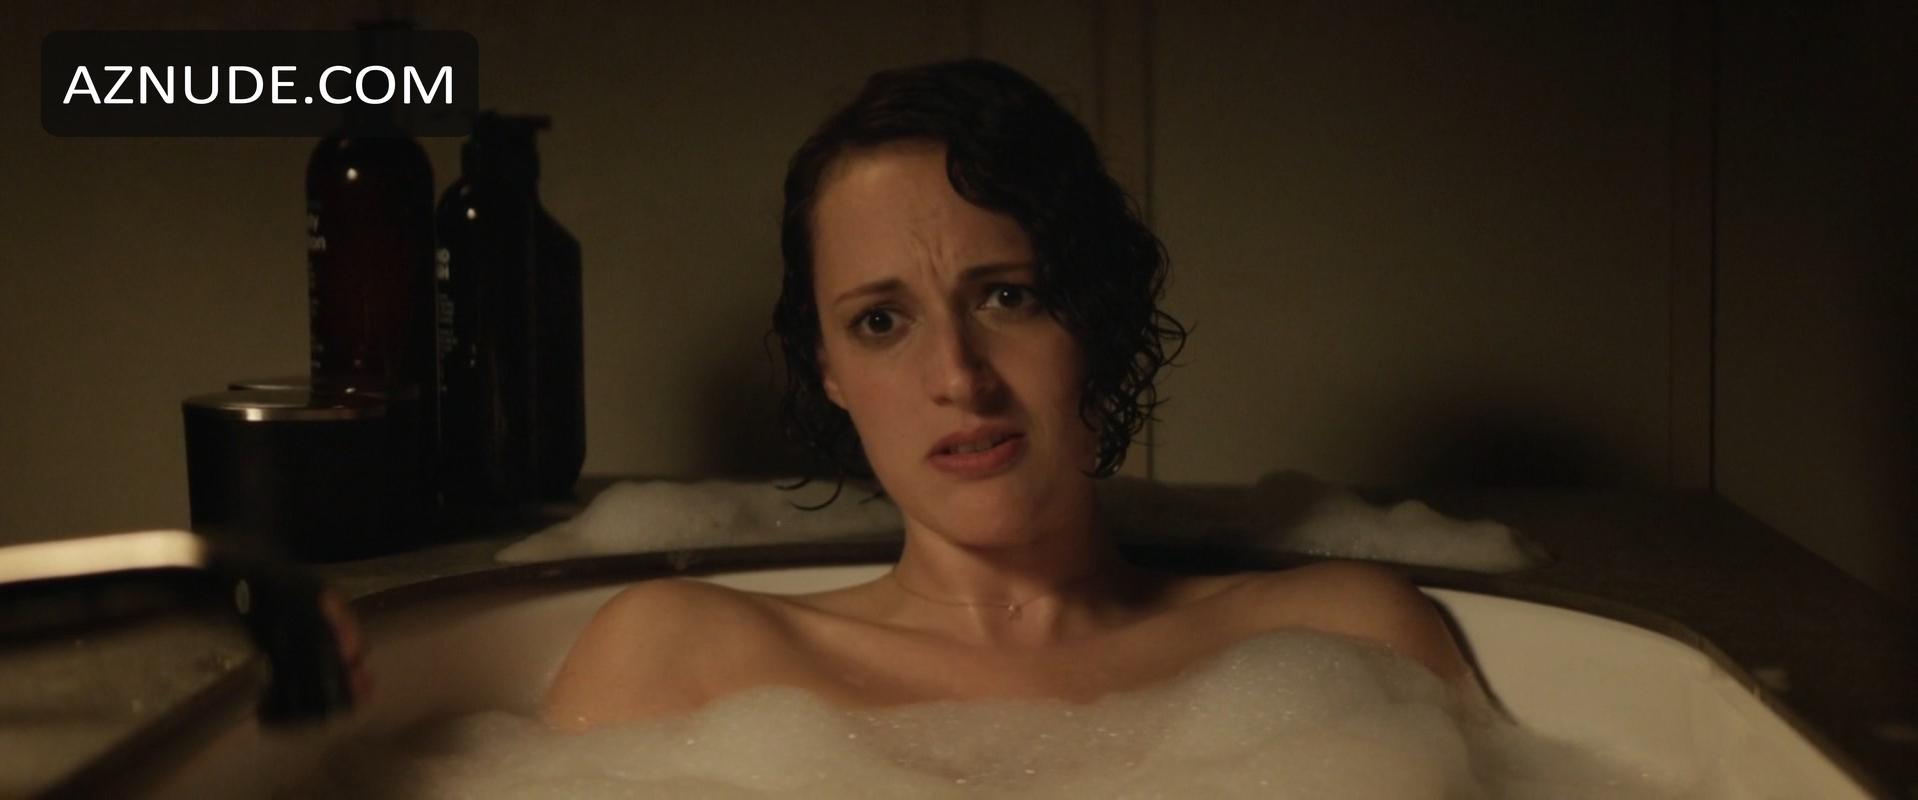 35 Phoebe Waller-bridge Nude Pictures Which Are